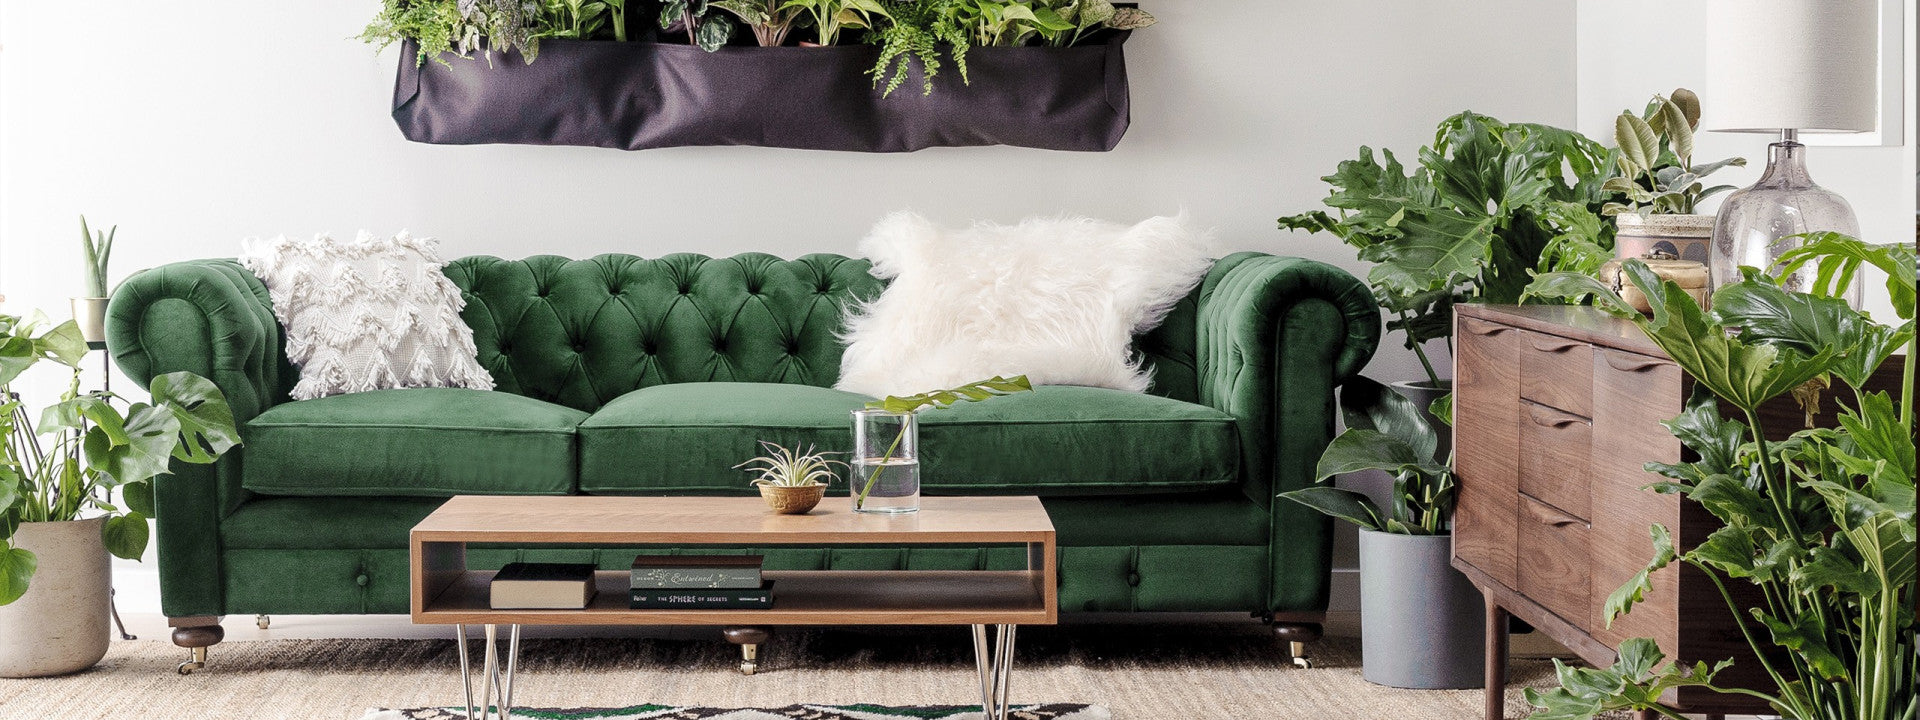 A stylish living room features a green velvet sofa with decorative pillows, surrounded by numerous green plants. Above the sofa is a vertical garden with lush greenery. A wooden coffee table with books and a glass of water stands in front of the sofa, and a wooden dresser is on the right.